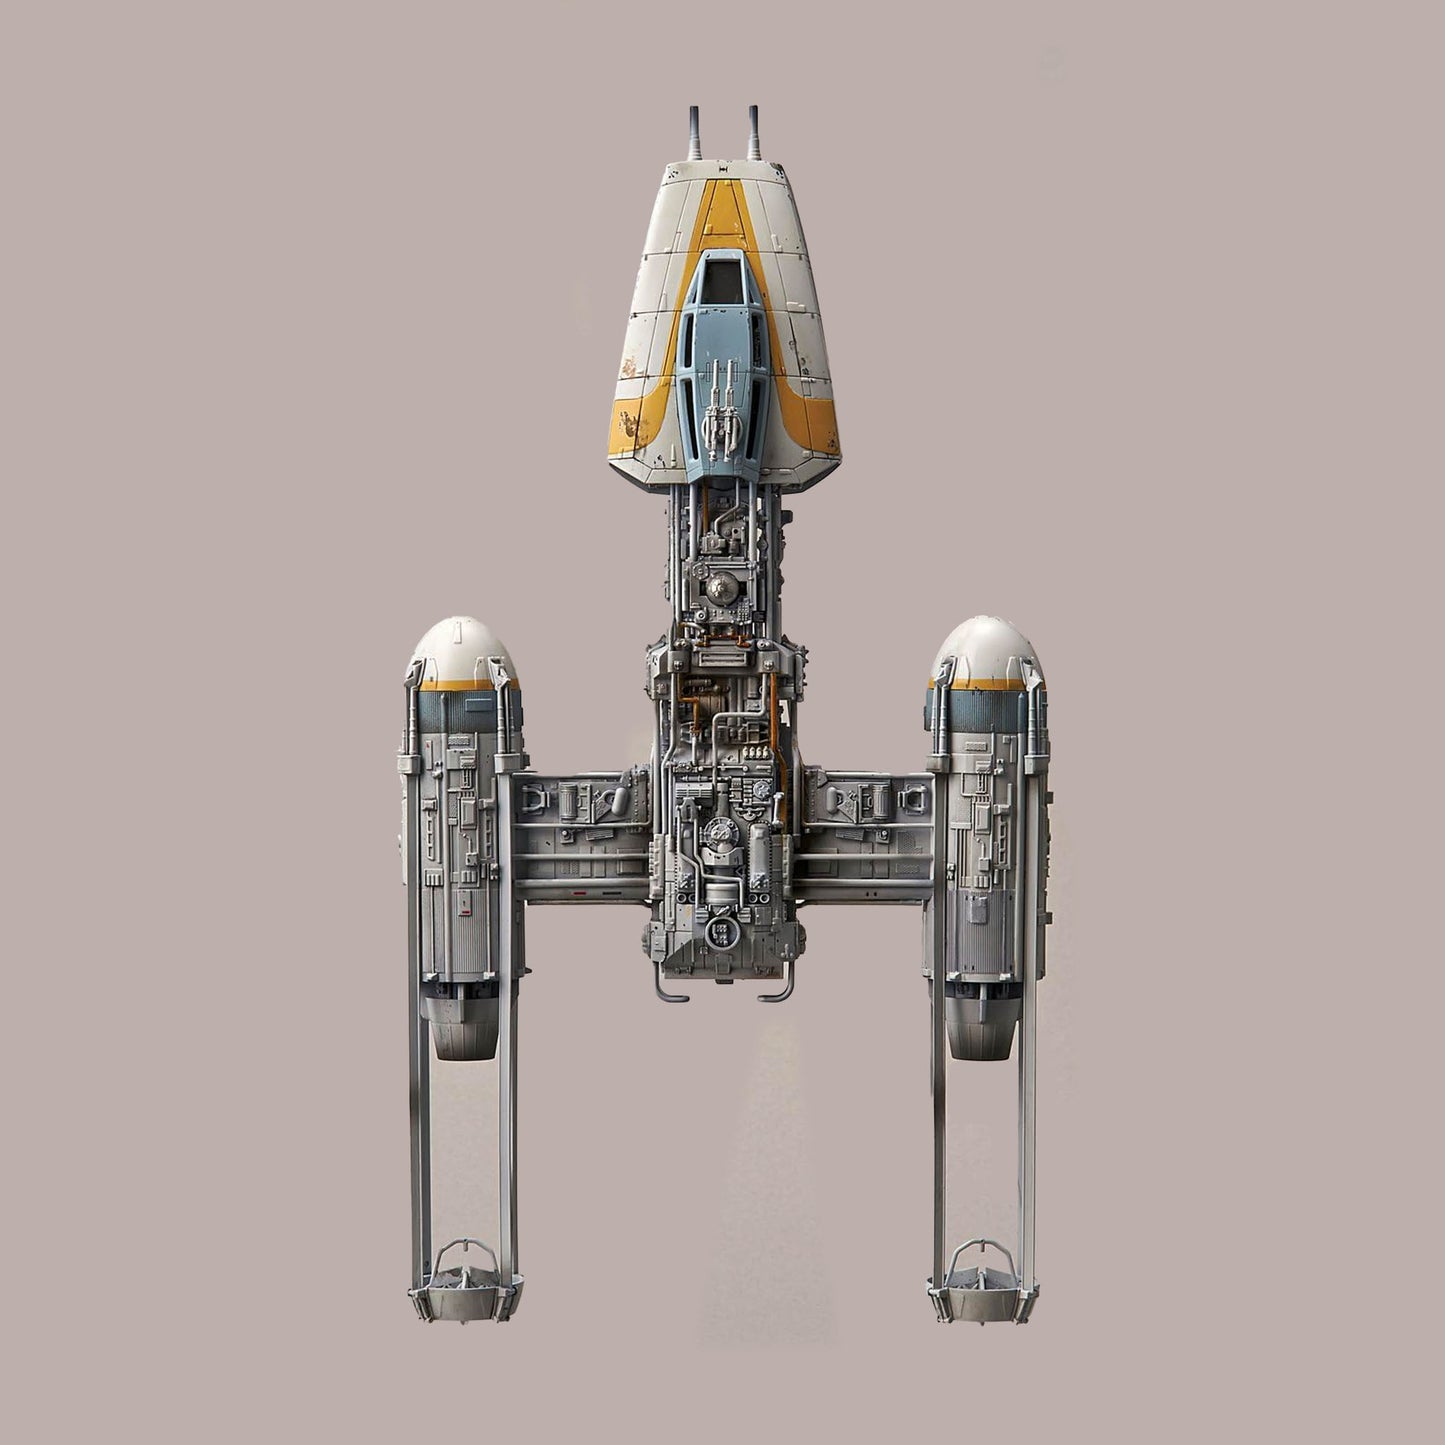 Load image into Gallery viewer, Y-Wing Starfighter (Star Wars: A New Hope) 1:72 Scale Model Kit
